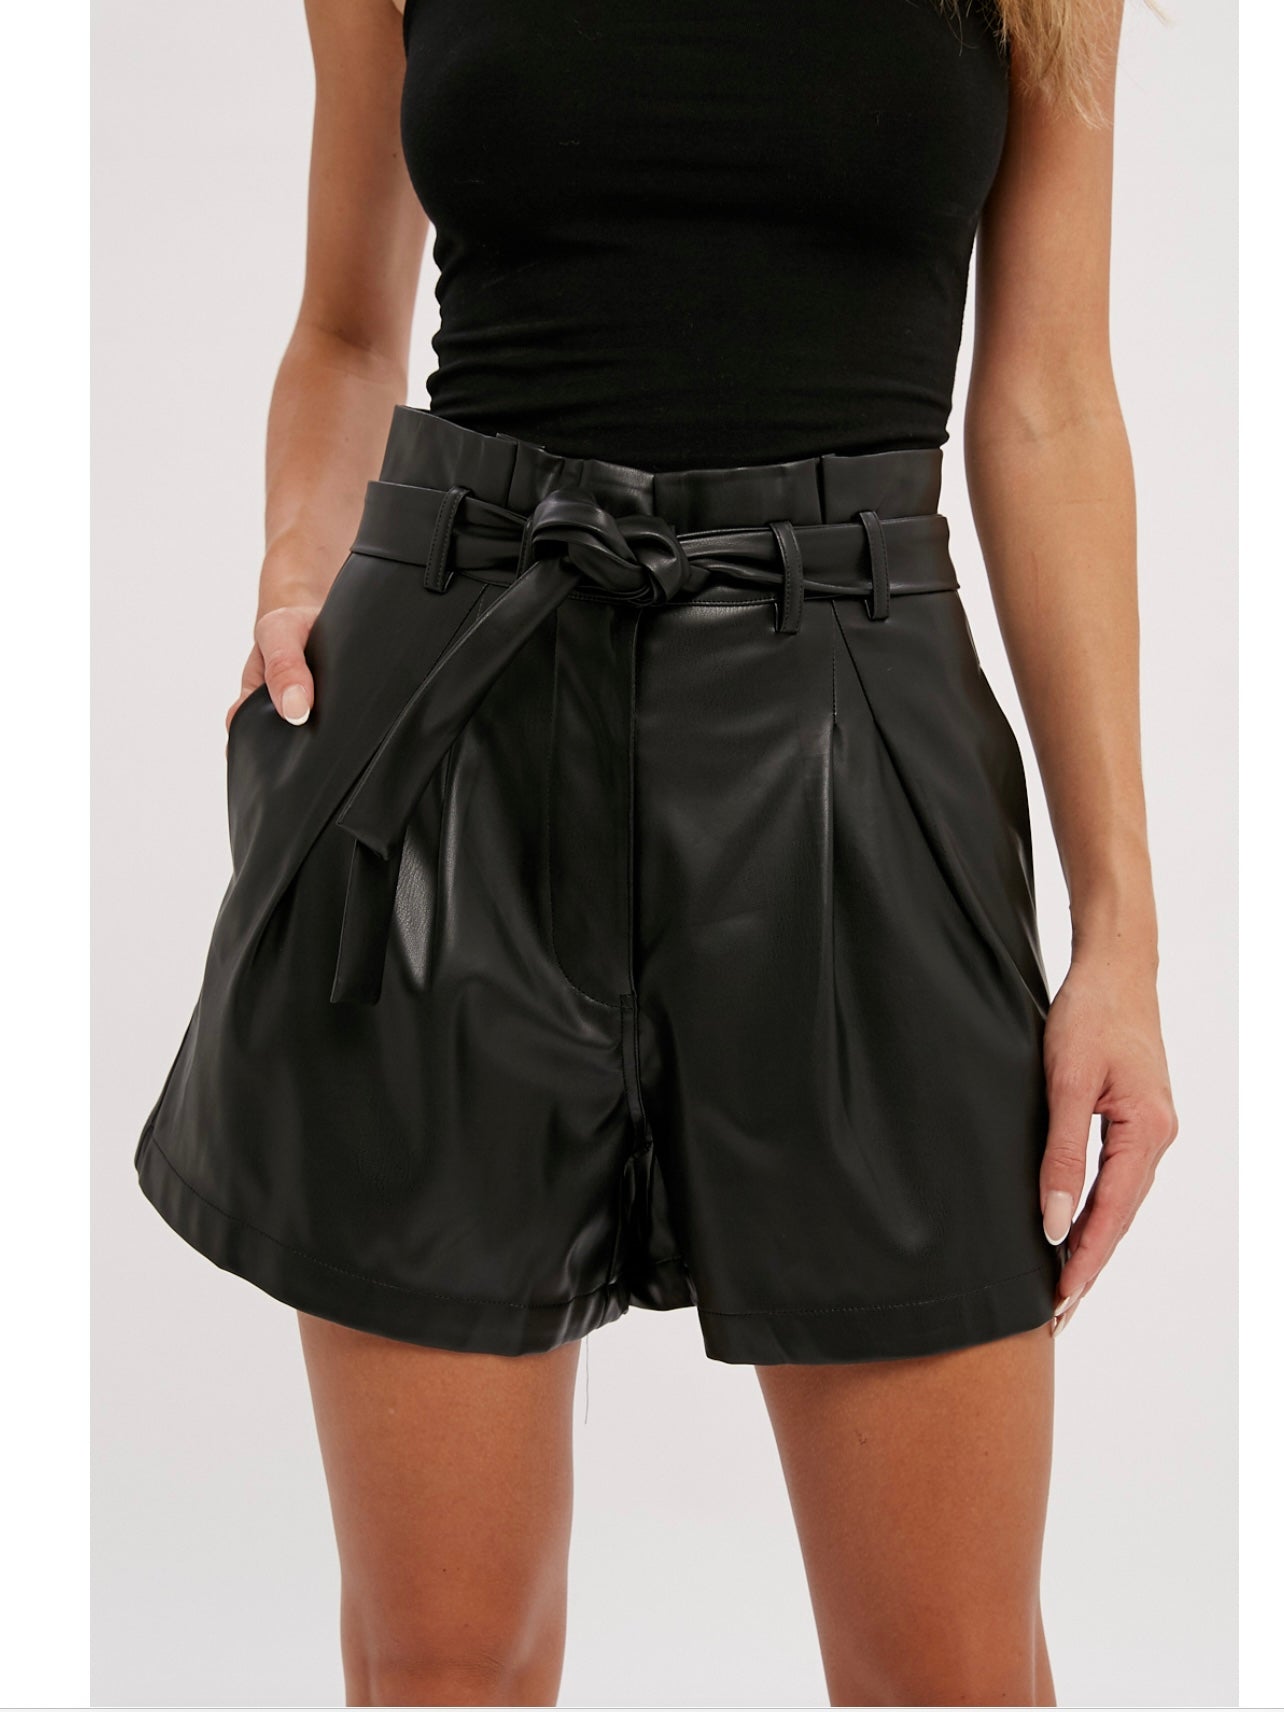 Fawn Faux Leather Shorts in Black